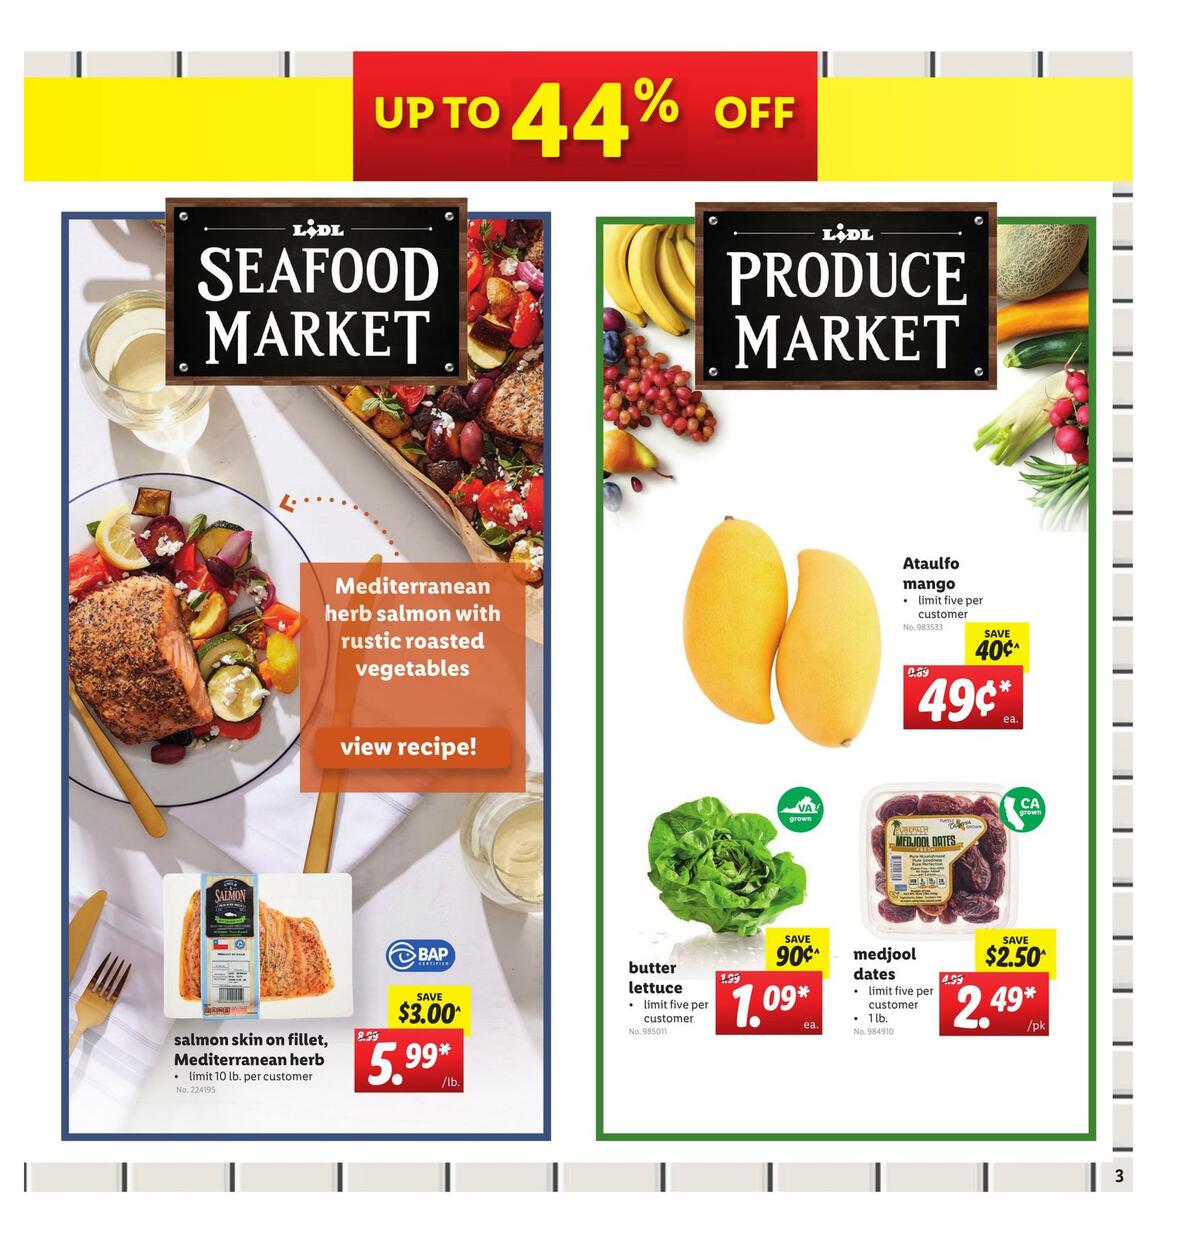 LIDL Weekly Ad from April 15